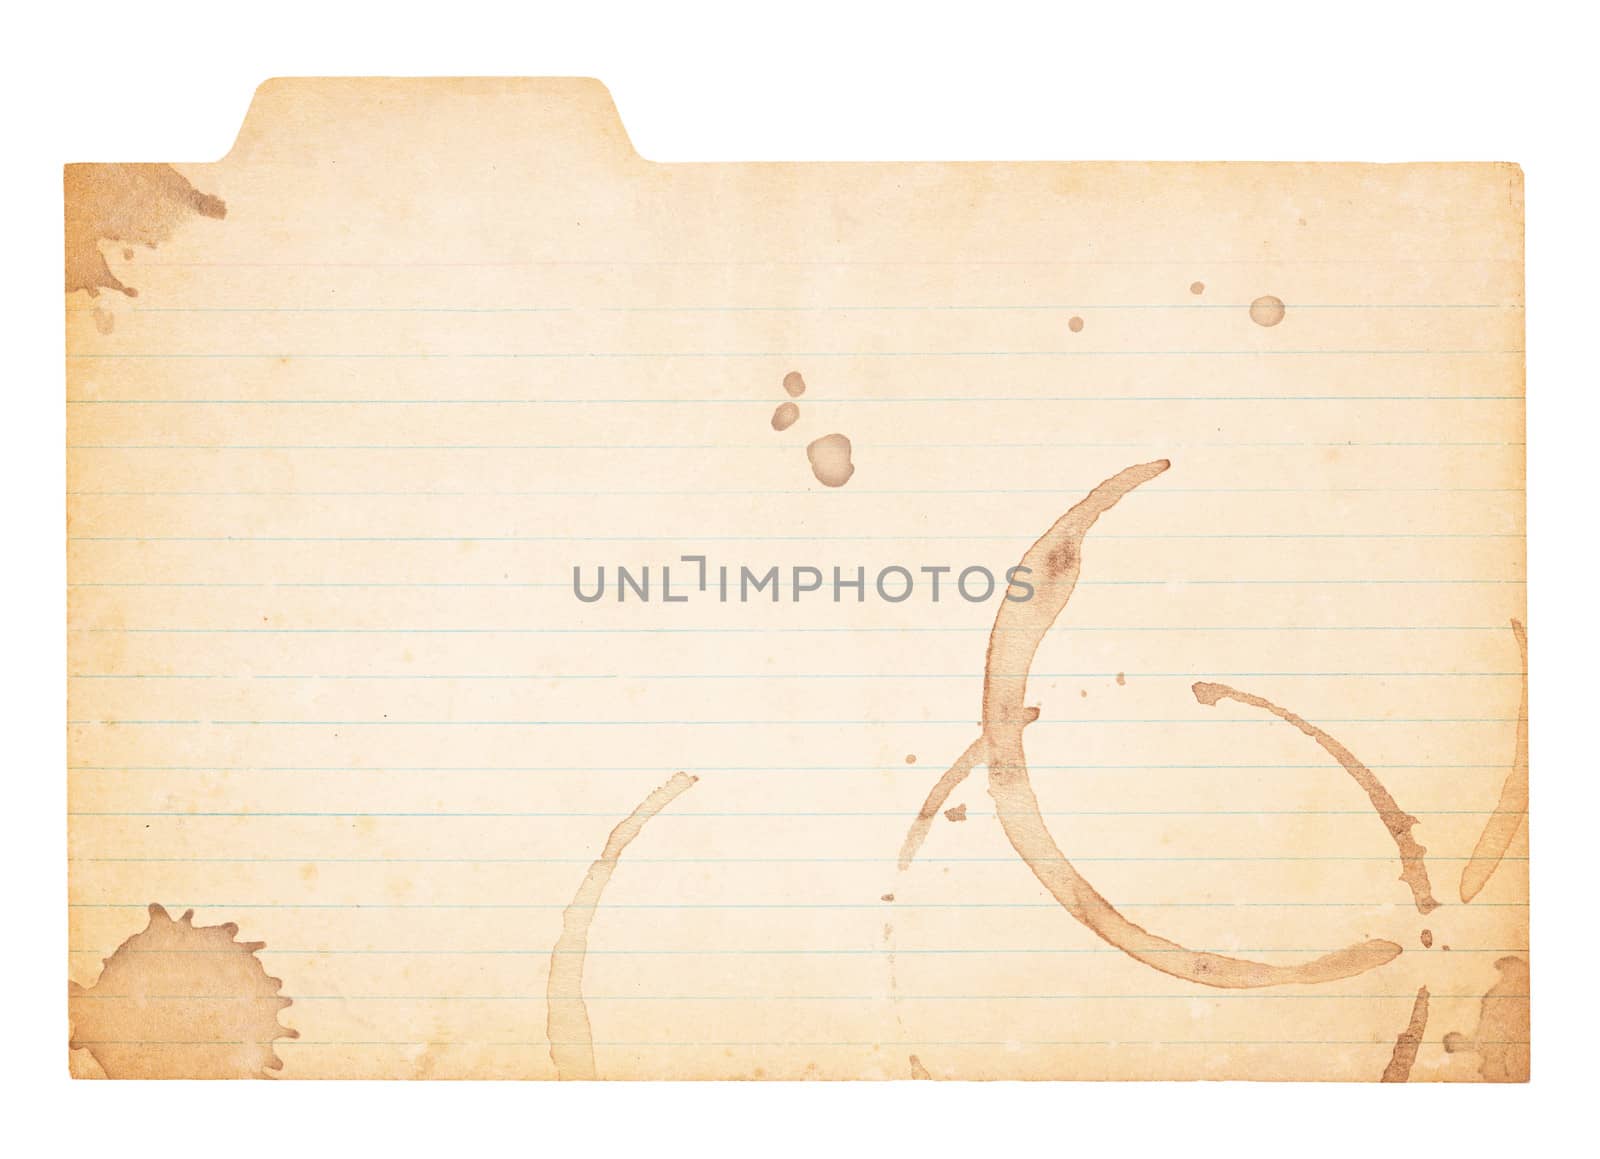 Vintage Tabbed Index Card With Coffee Stains by Em3